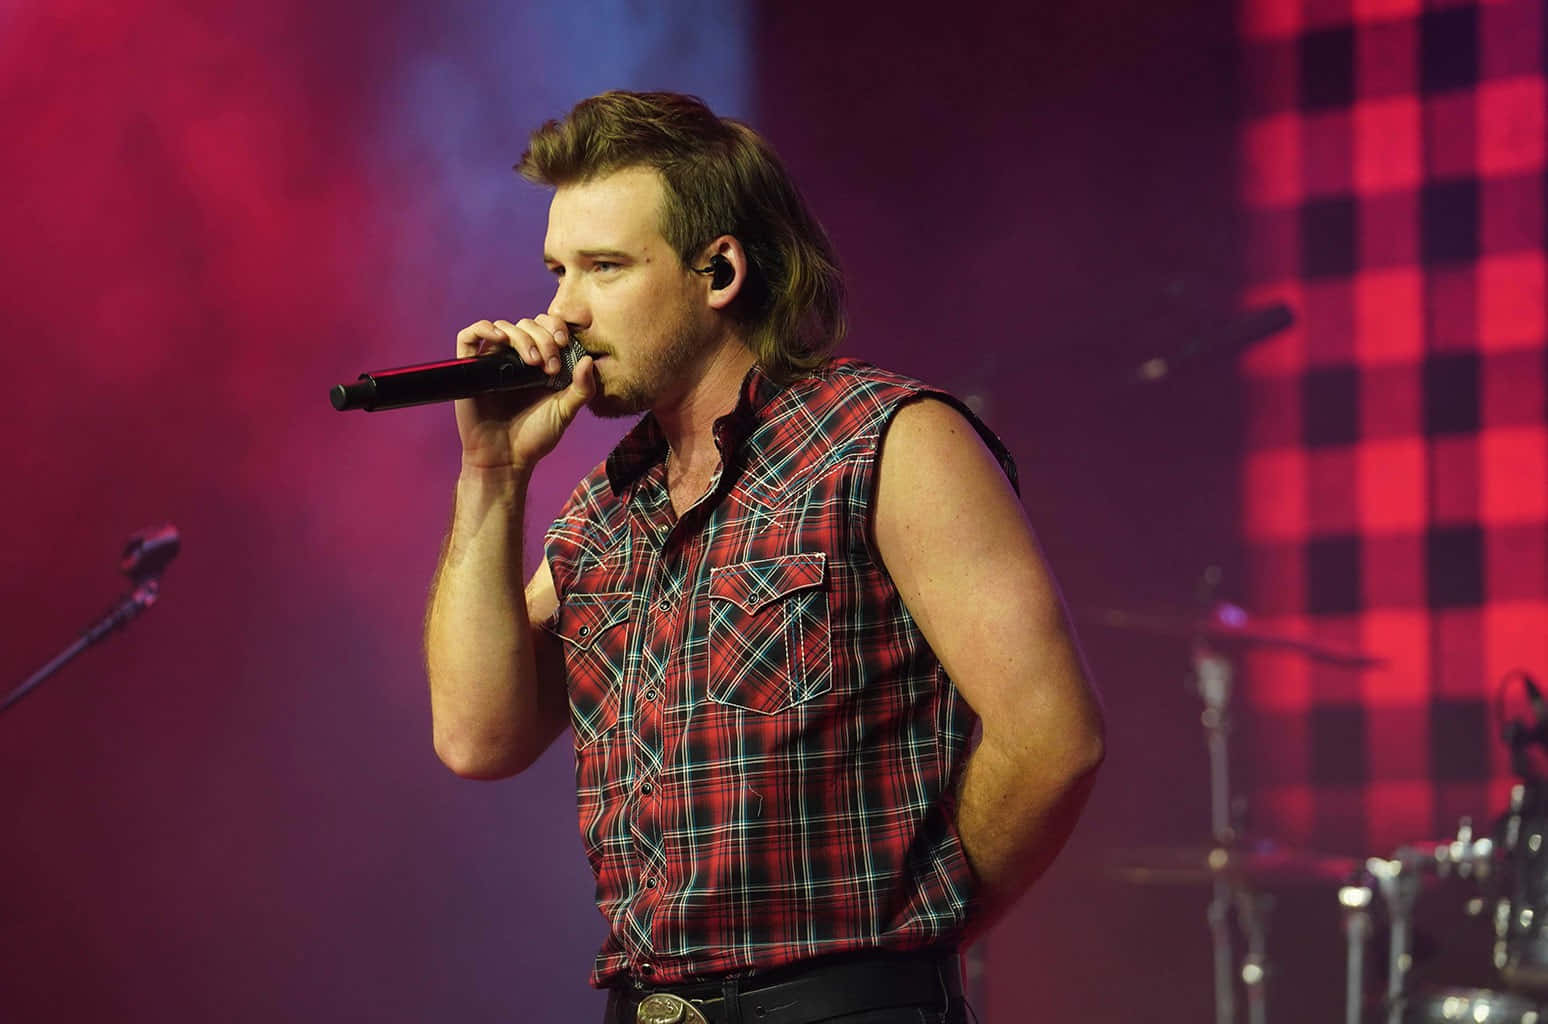 A Man In A Plaid Shirt Singing Into A Microphone